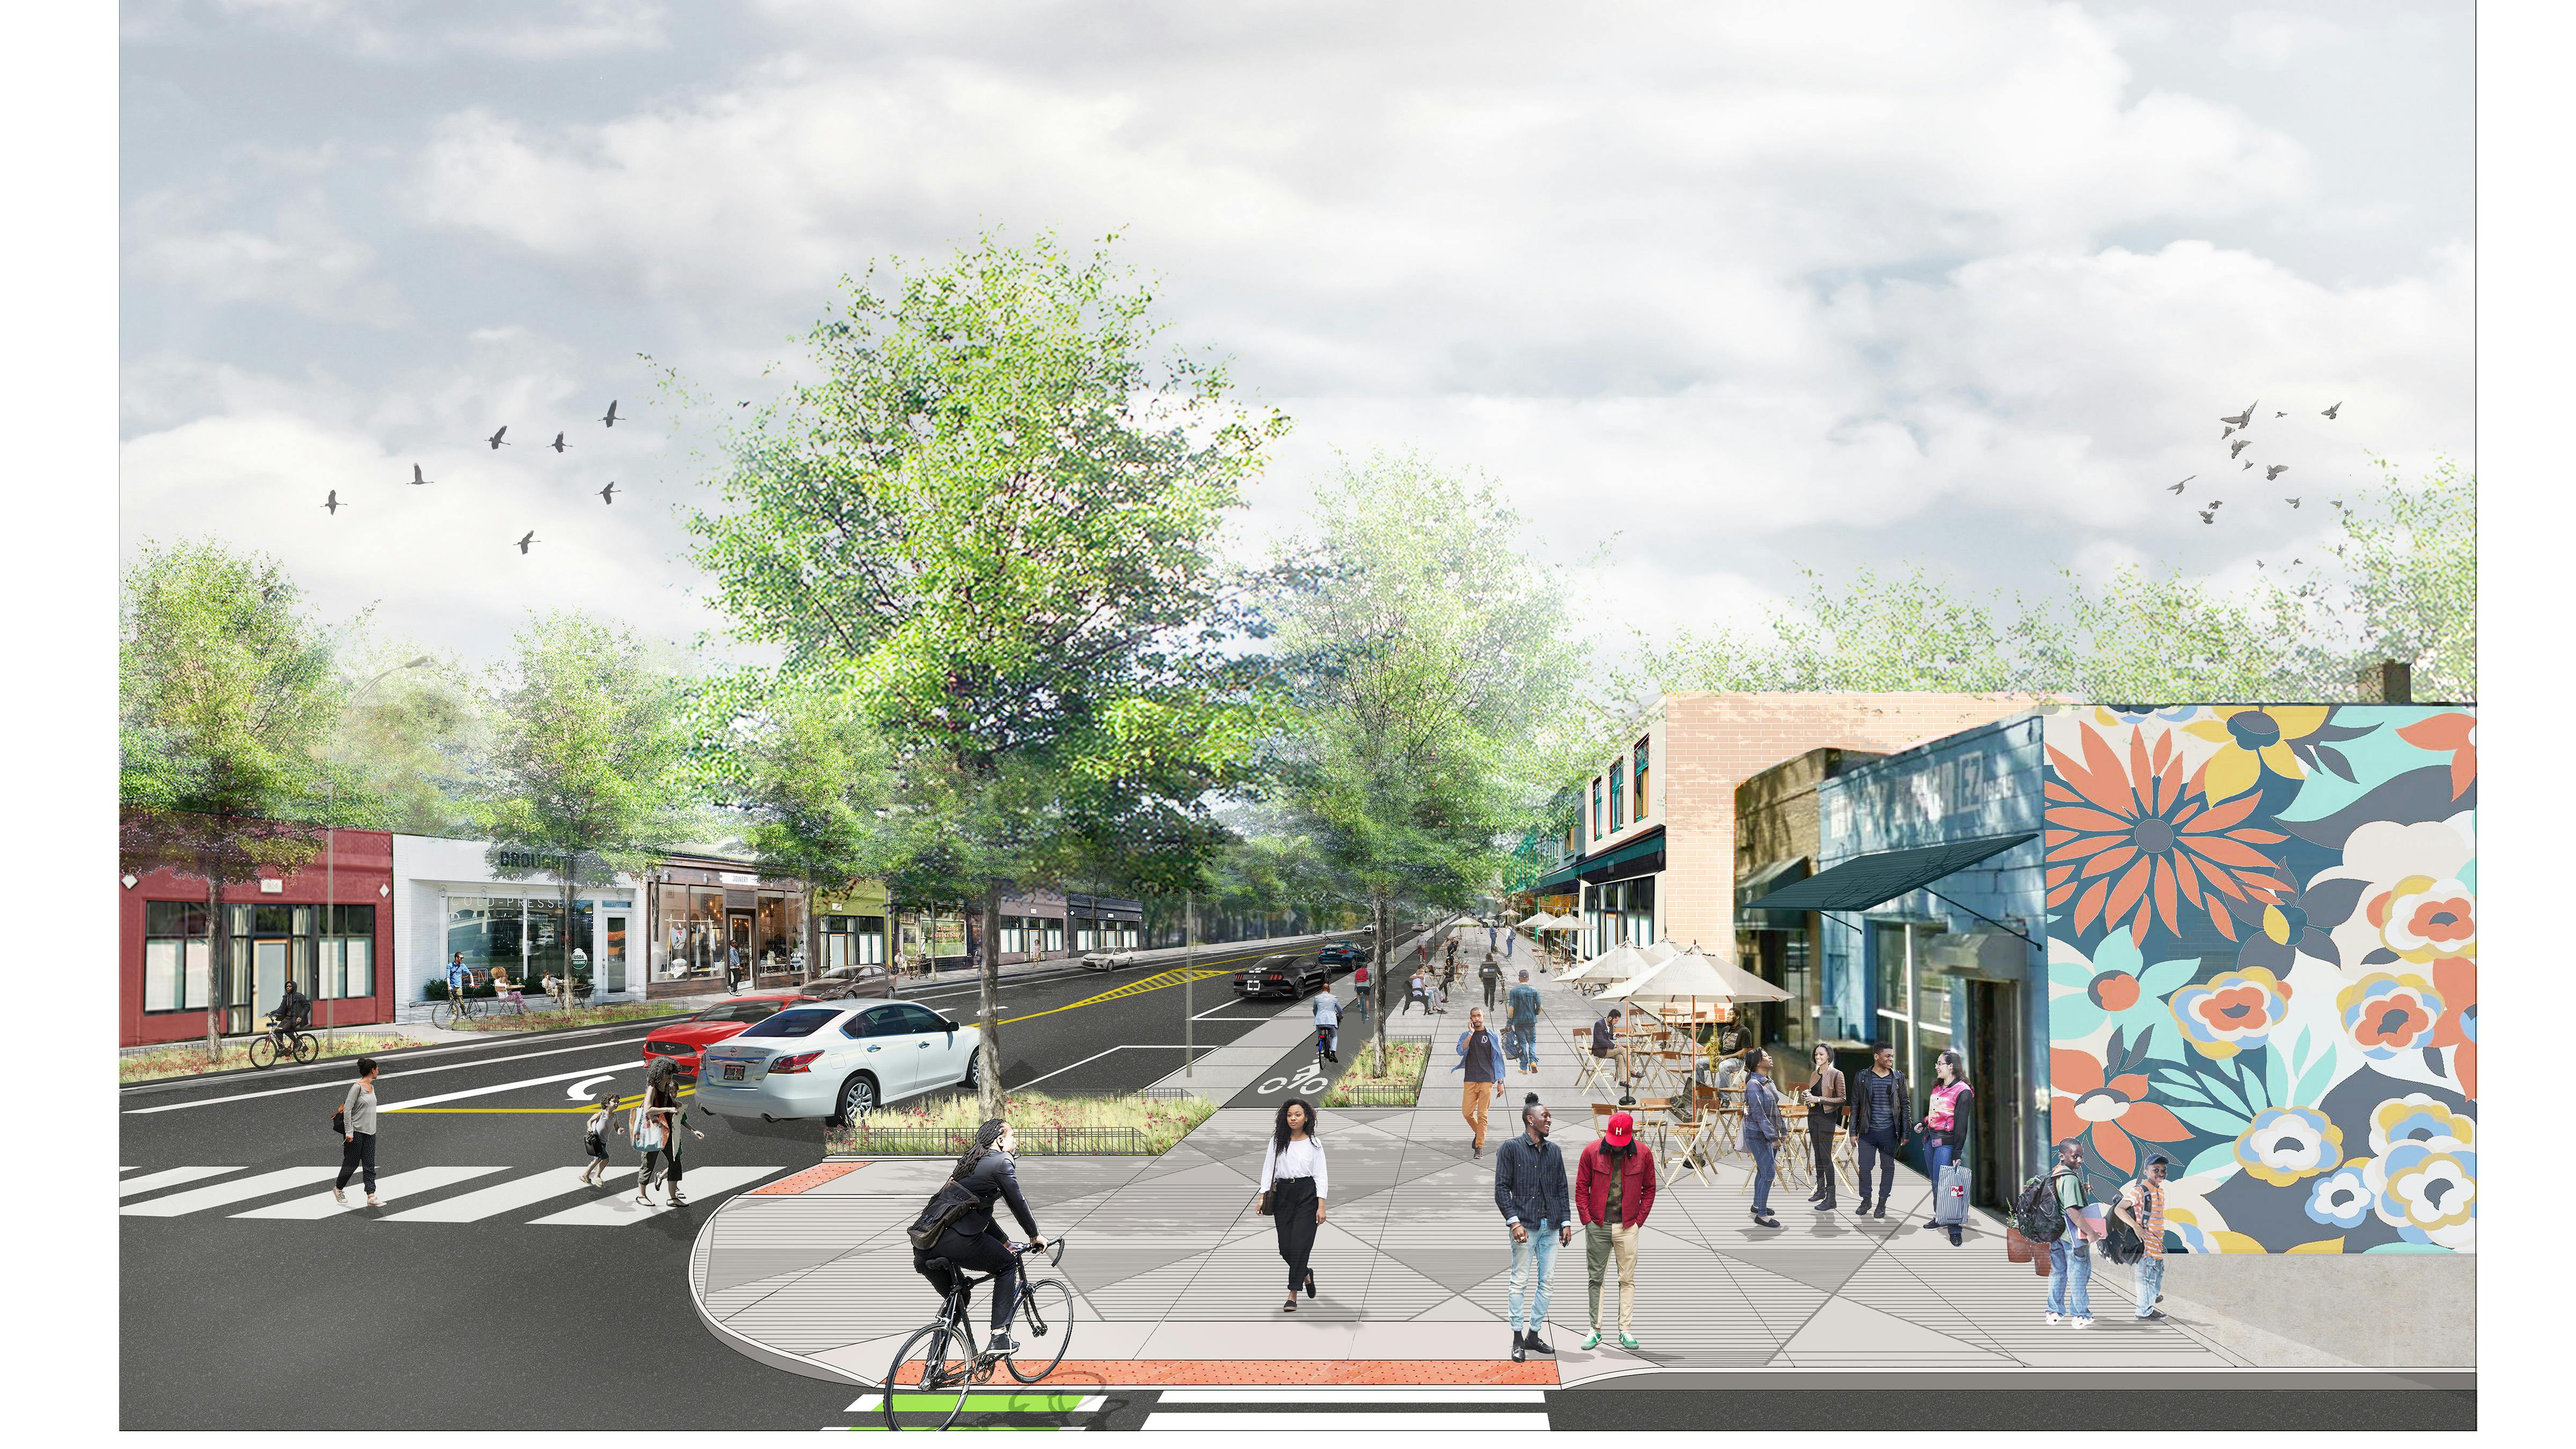 Perspective rendering transforming livernois with reduced drive lanes, planted bump outs at street corner, bike lane dividing roadway and pedestrian sidewalk, planting beds with trees dividing bike lane and sidewalk with enough room for vibrant storefronts.